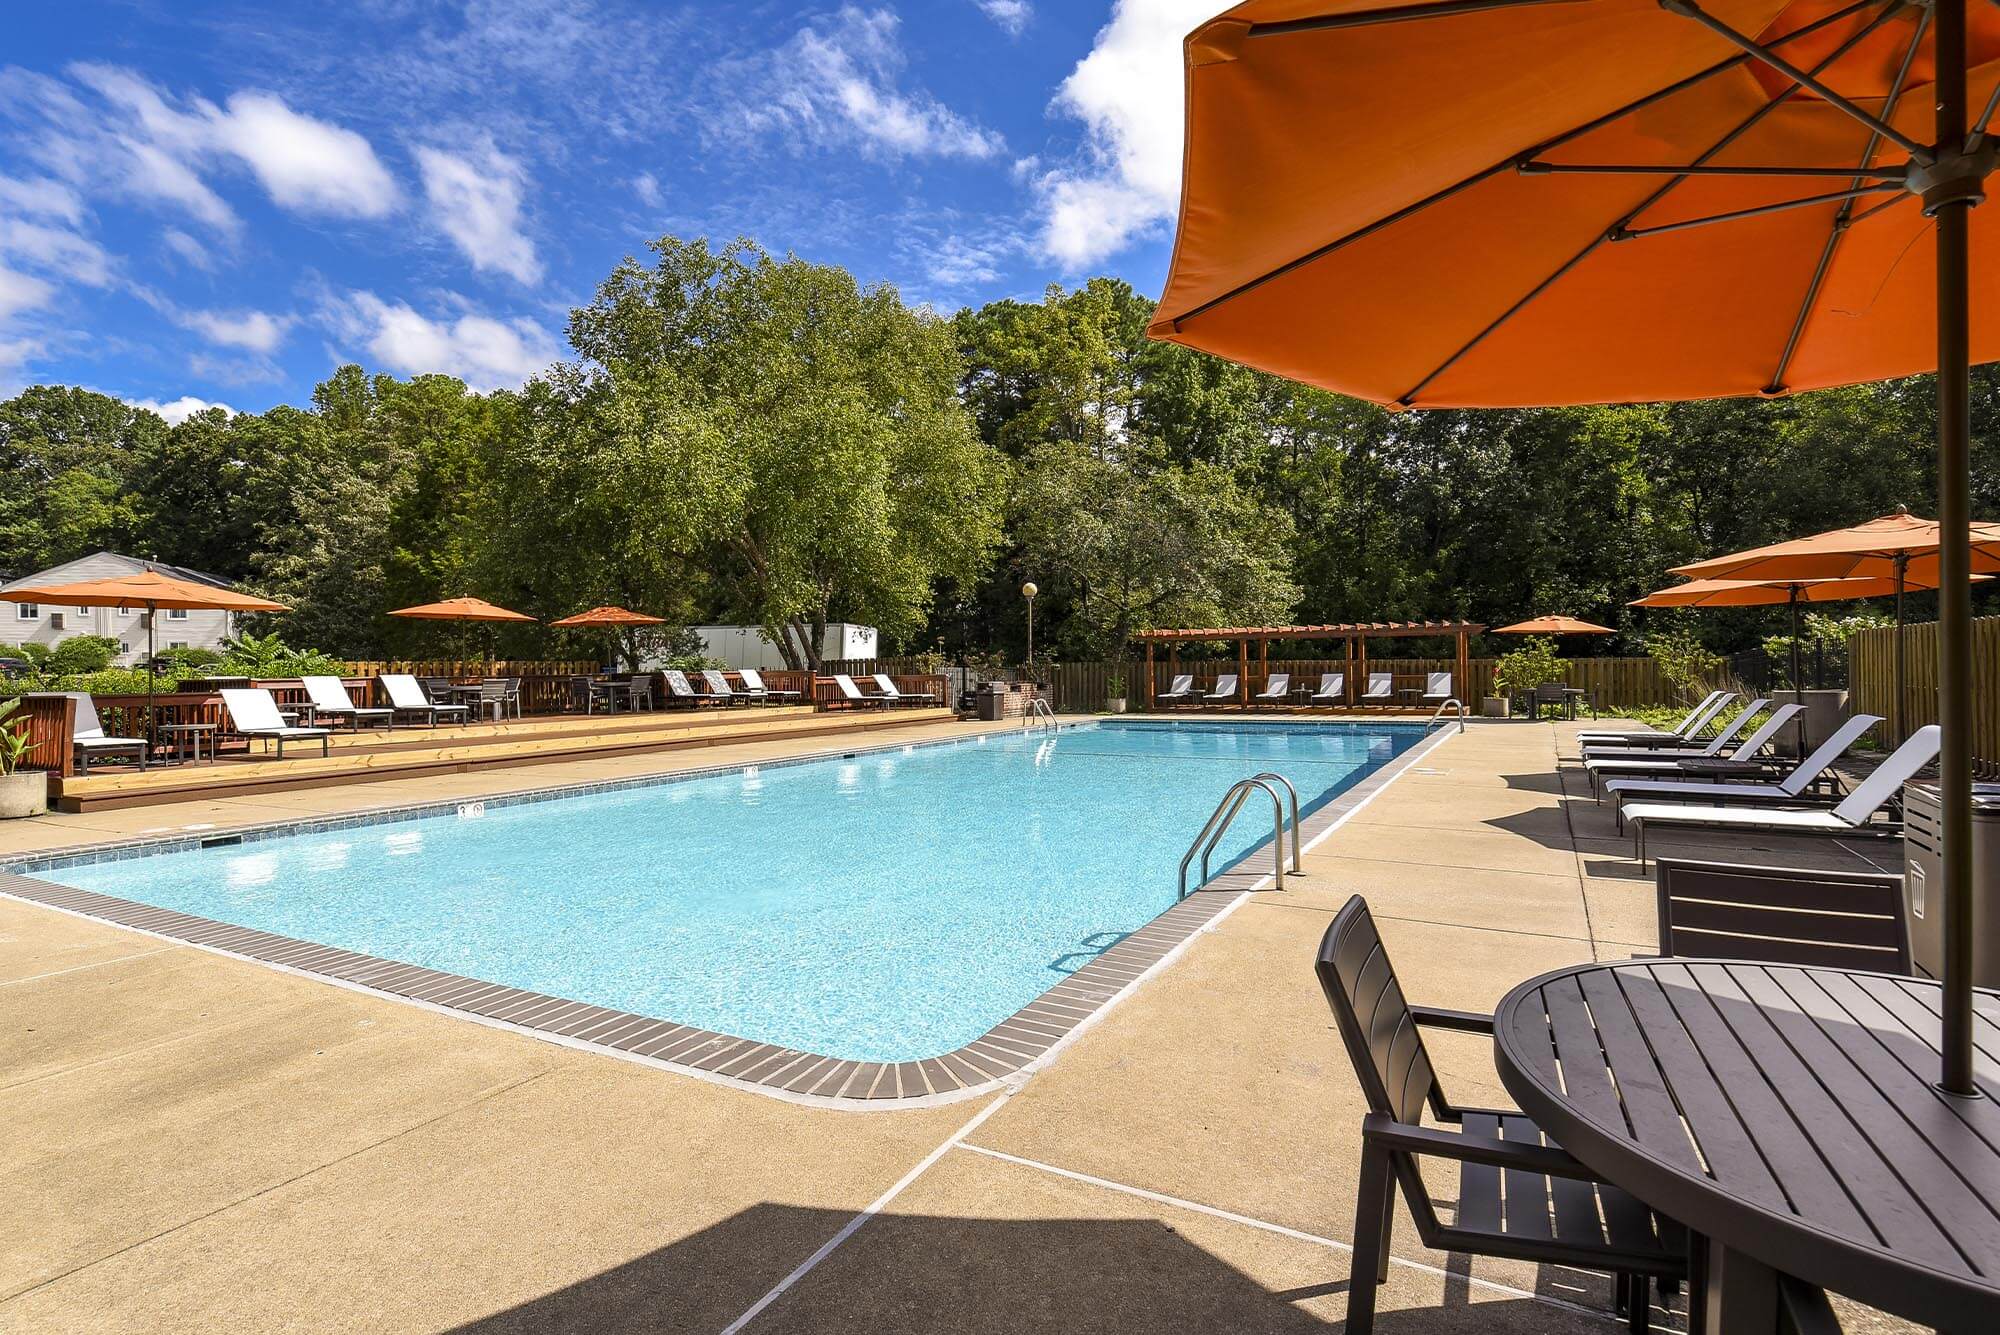 Sparkling pool with lounge chairs and umbrella at Chesterfield Flats, North Chesterfield, Virginia